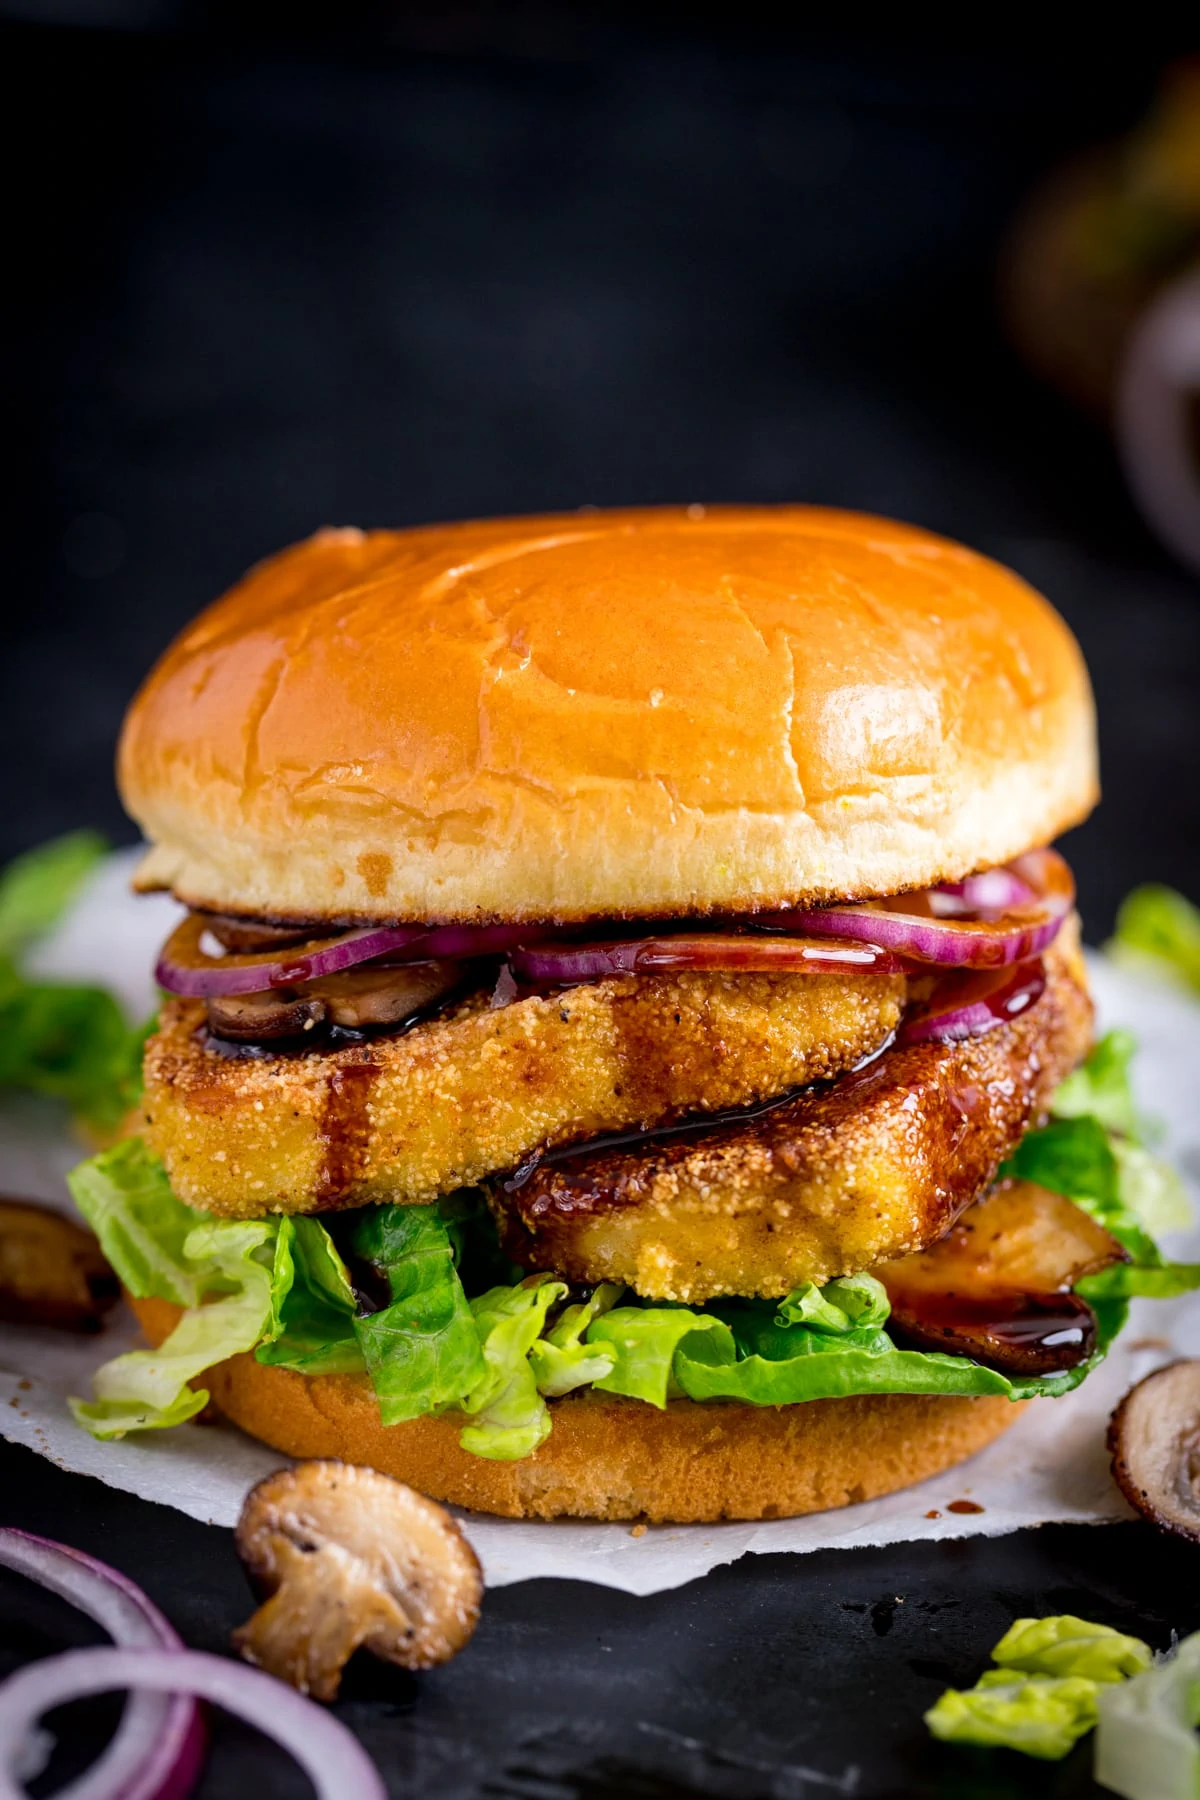 halloumi burger with lettuce, onions and mushrooms against a dark background.